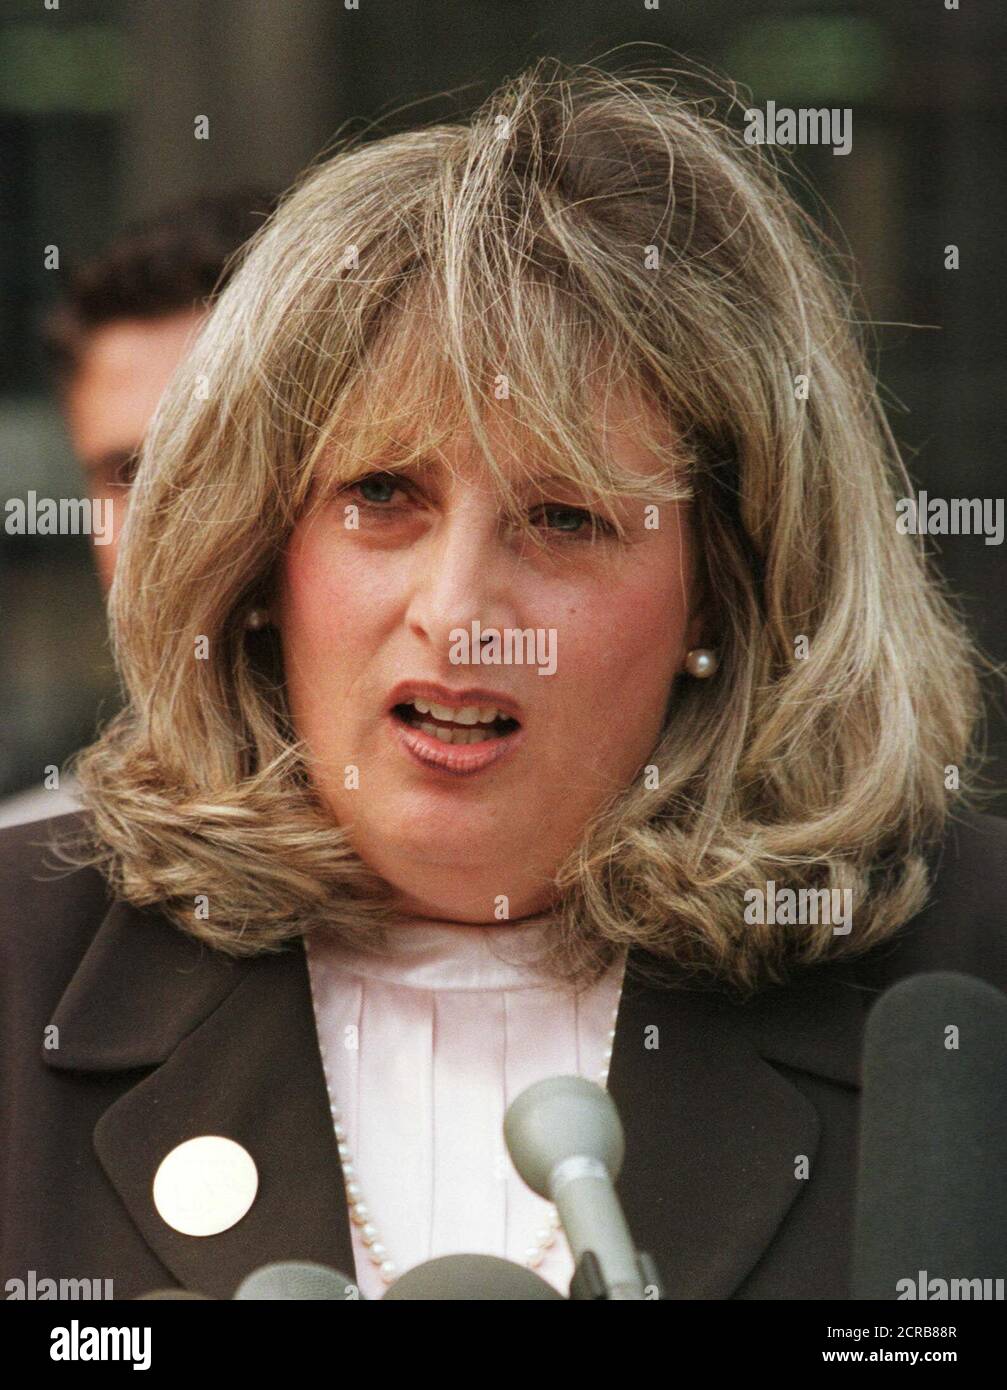 Linda Tripp was fired from her Department of Defense position January 19, 2001 by the Clinton administration after she refused to resign like other political appointees. Tripp speaks to reporters outside the U.S. Courthouse in Washington in this July 29, 1998 file photo. Tripp's taping of Monica Lewinsky set in the motion the events that lead to President Bill Clinton's impeachment.  BM/RCS Stock Photo